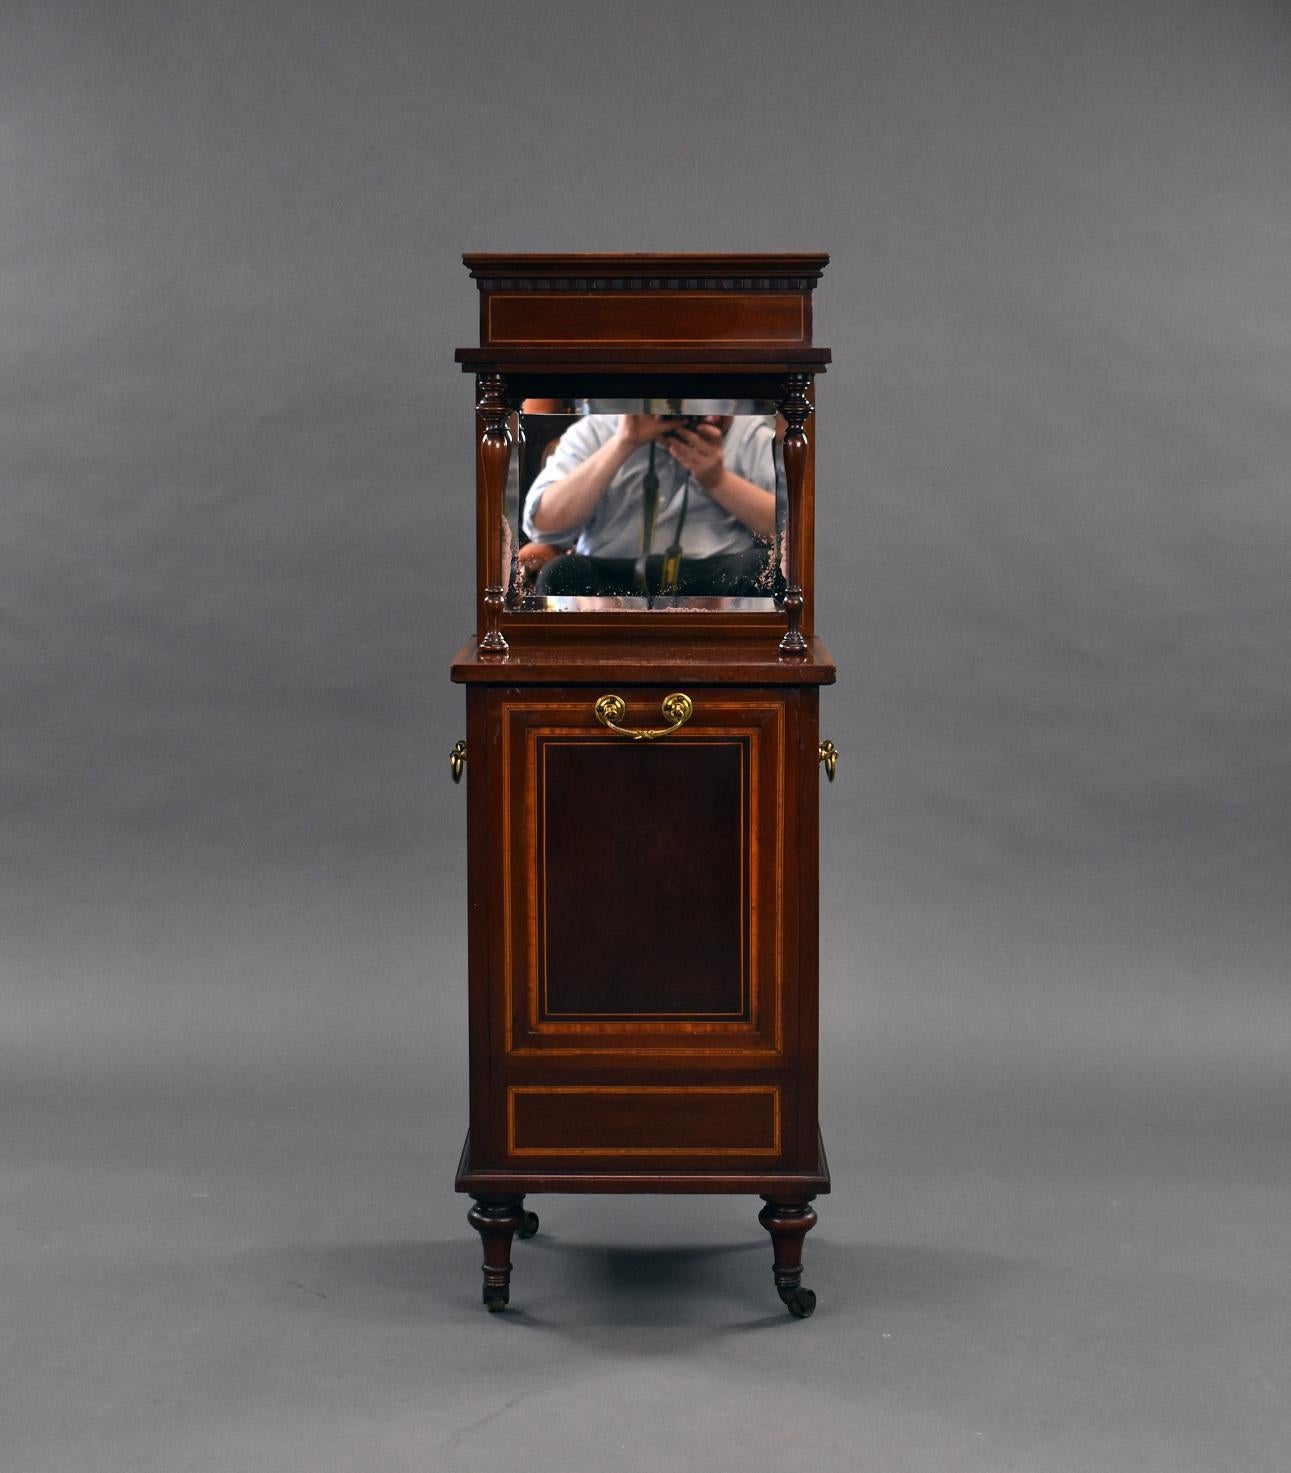 Edwardian Mahogany Coal Purdonium in good condition with mirror back to the top with elegant spindles to the front and banded inlay to the front and sides, with carrying handles to each side. The front pulls down to reveal the original coal box and